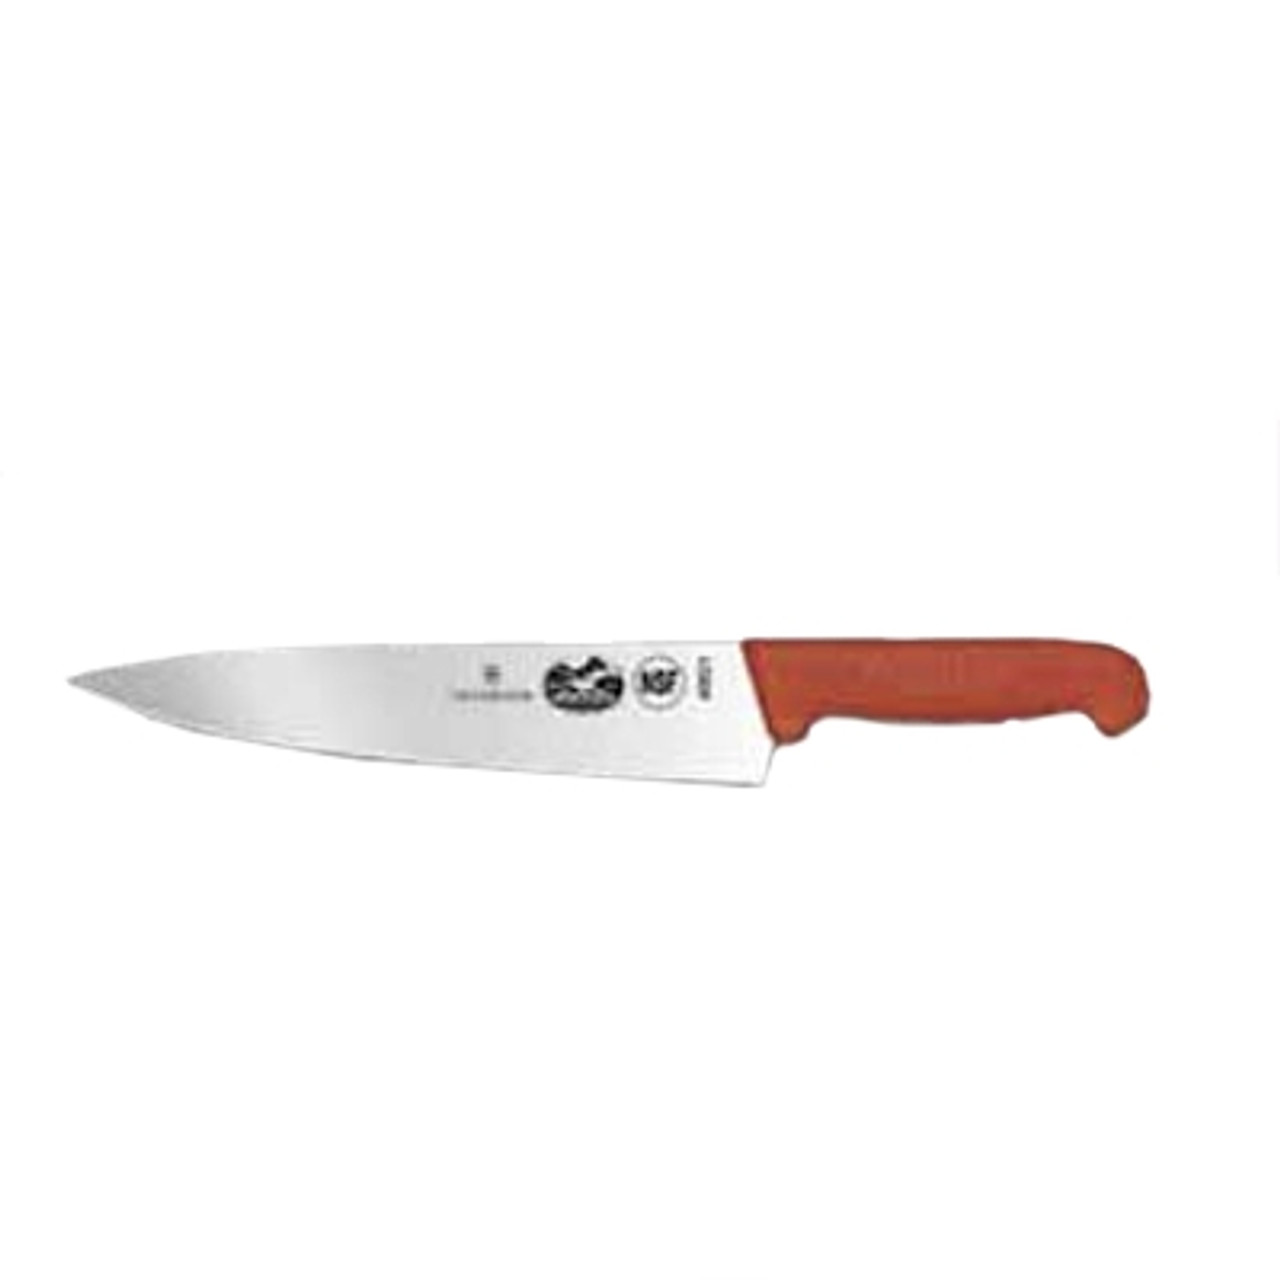 Victorinox 5.2001.25 10" Chef's Knife - Red (Meat) Fibrox Handle